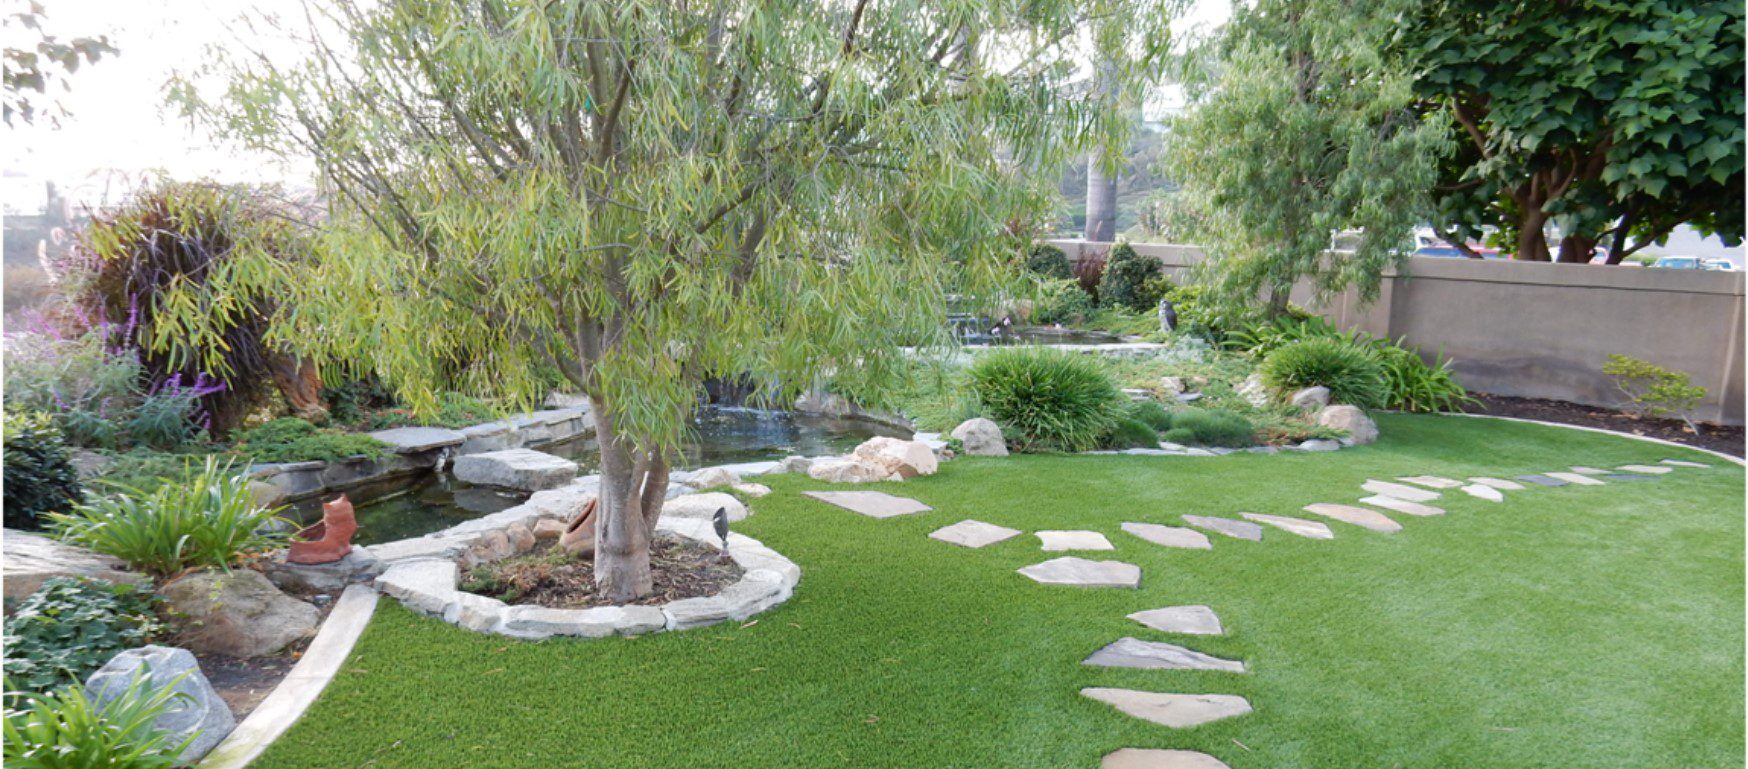 Residential Artificial Grass for lawn, patio, Pool & Pet Areas Inland Empire